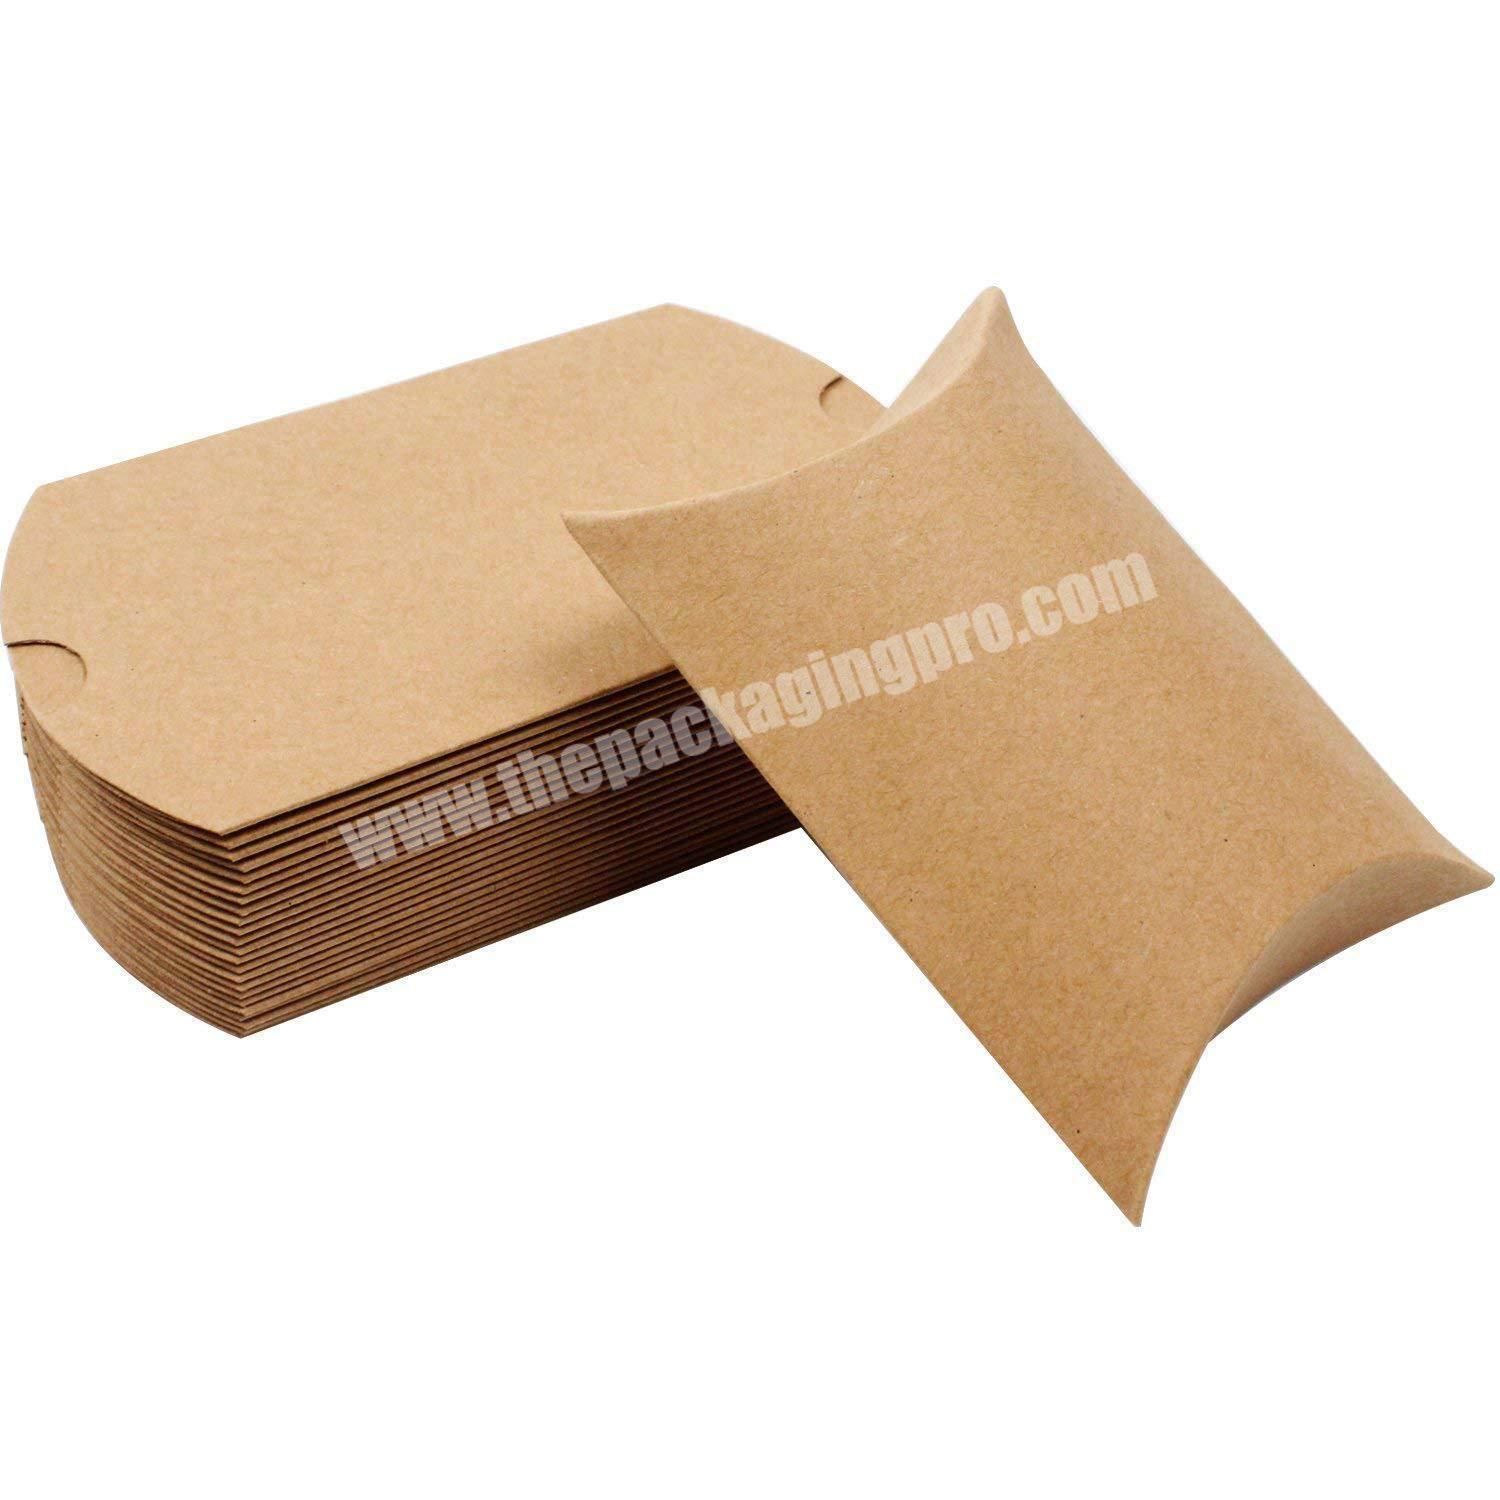 Wholesale Cheap Product Packaging Custom Boxes Cardboard Pillow Box In Stock